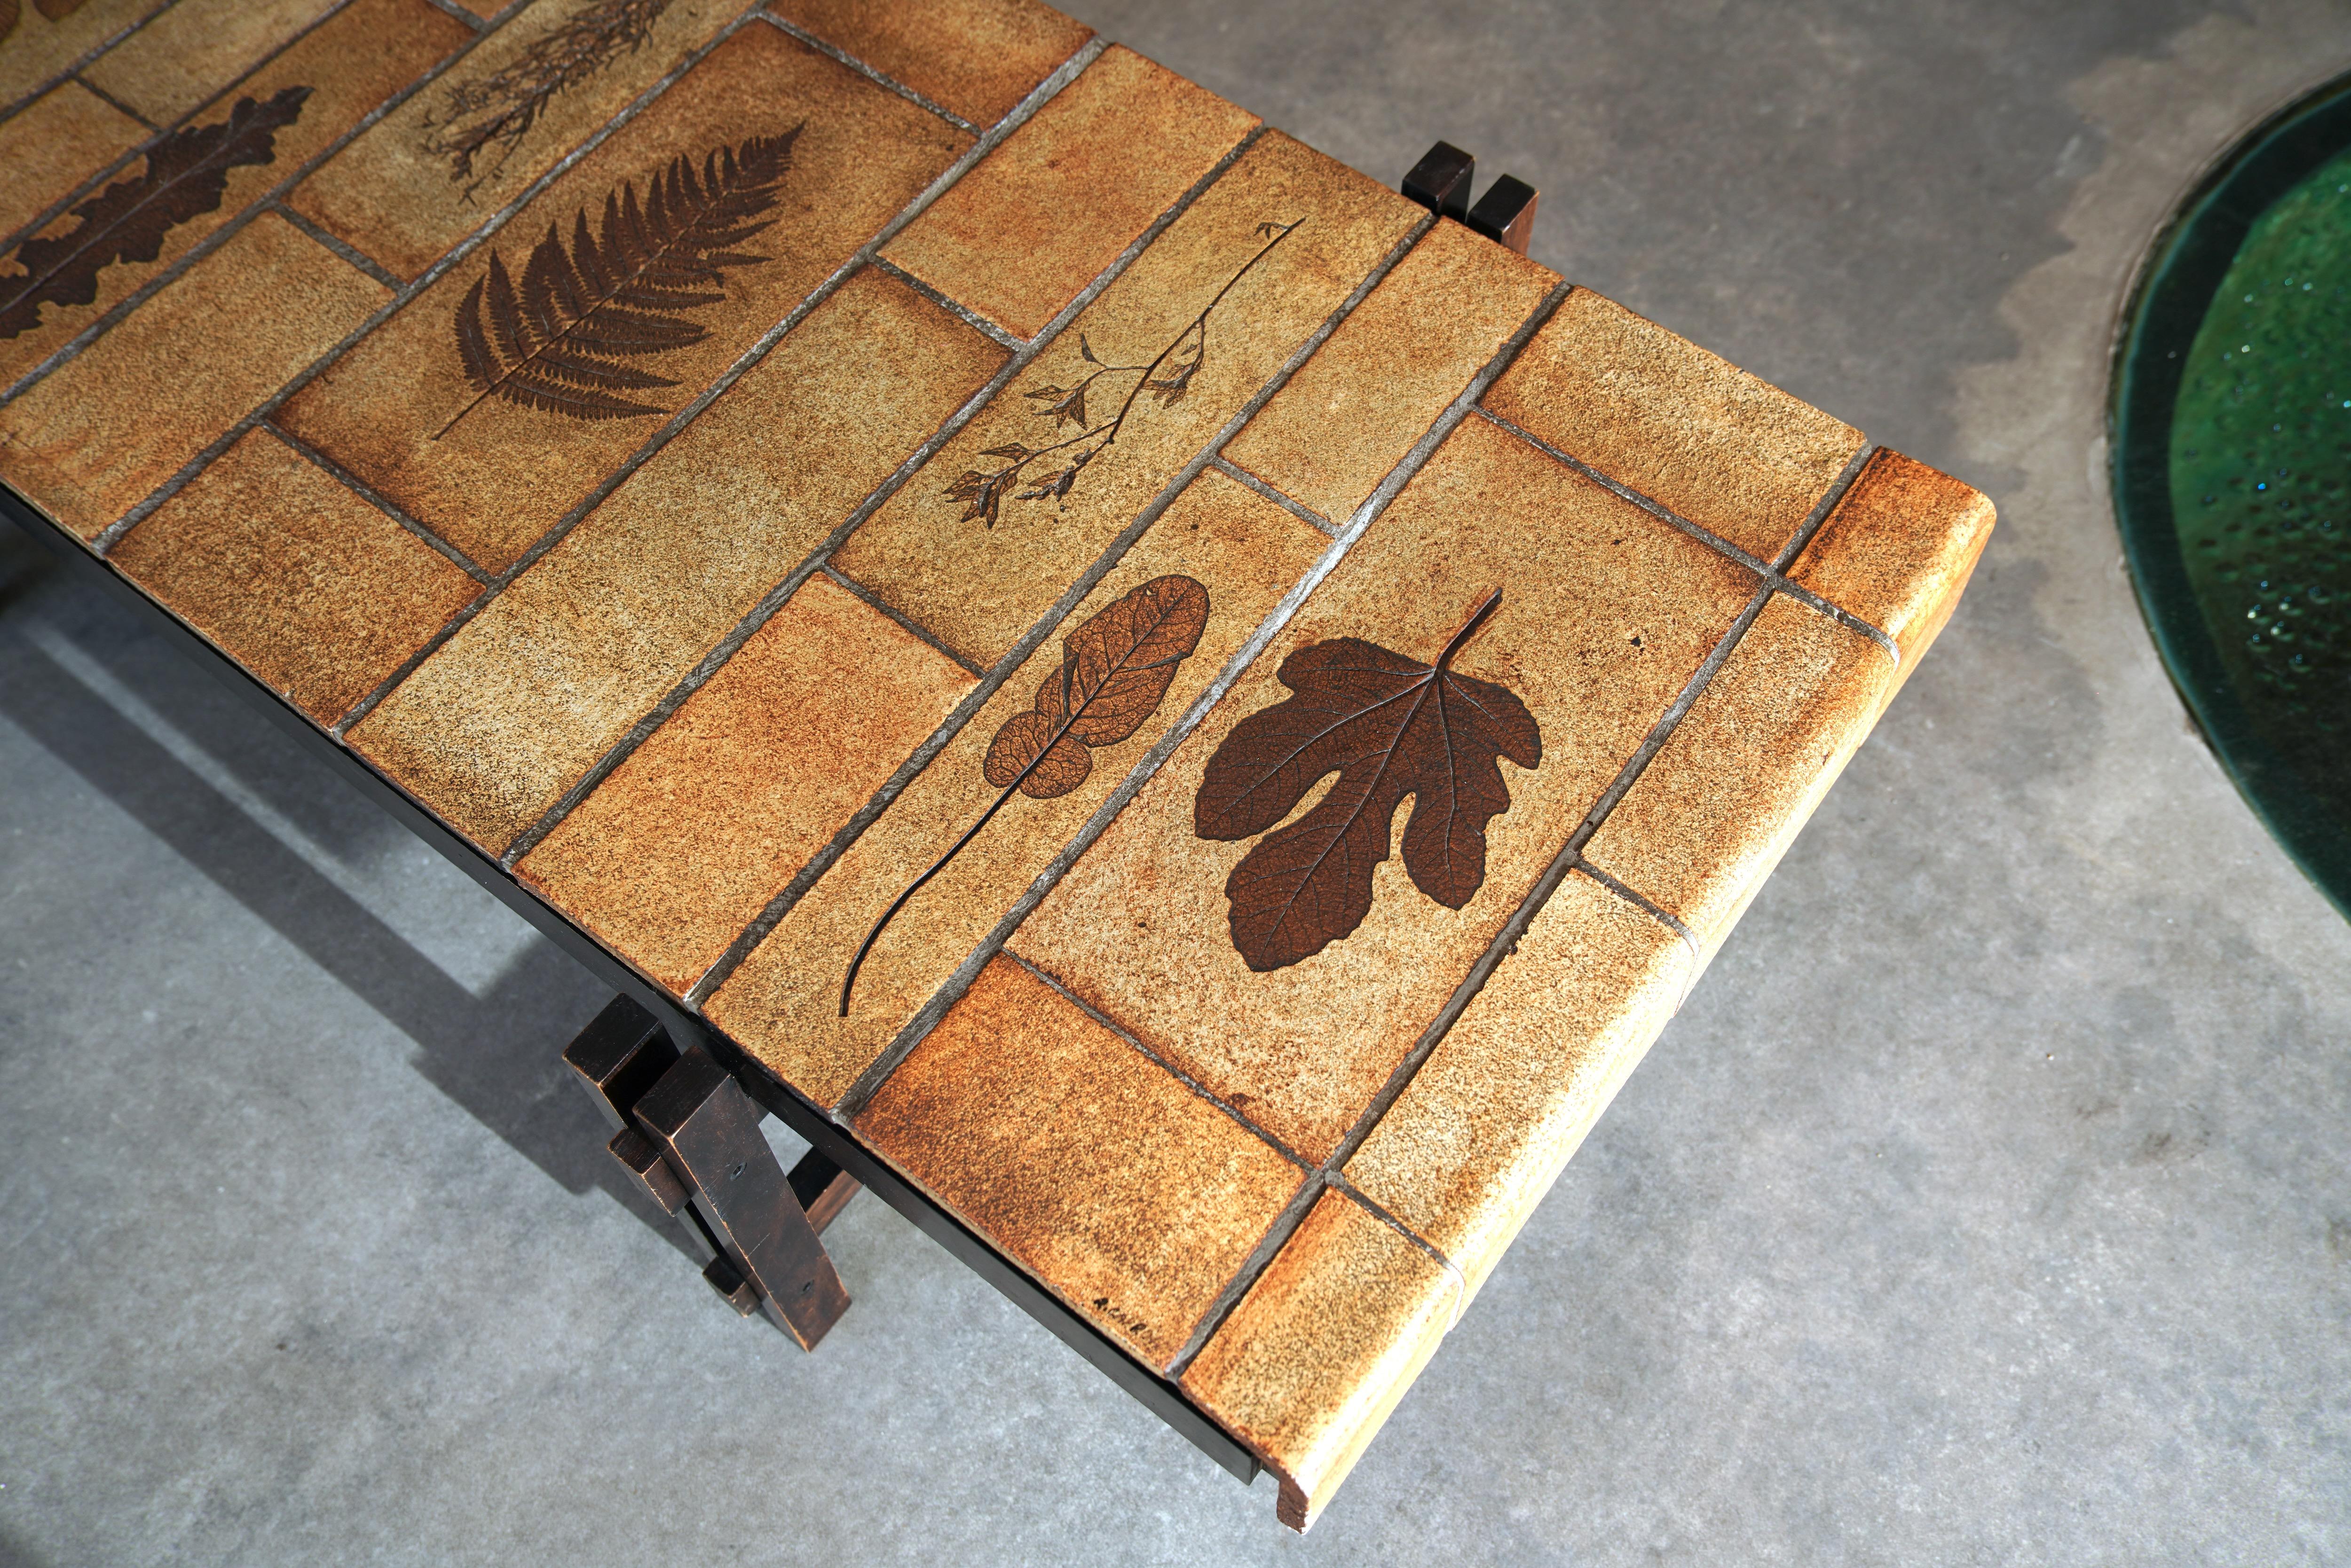 Glazed Roger Capron Coffee Table with Garrigue Tiles, France 1970s For Sale